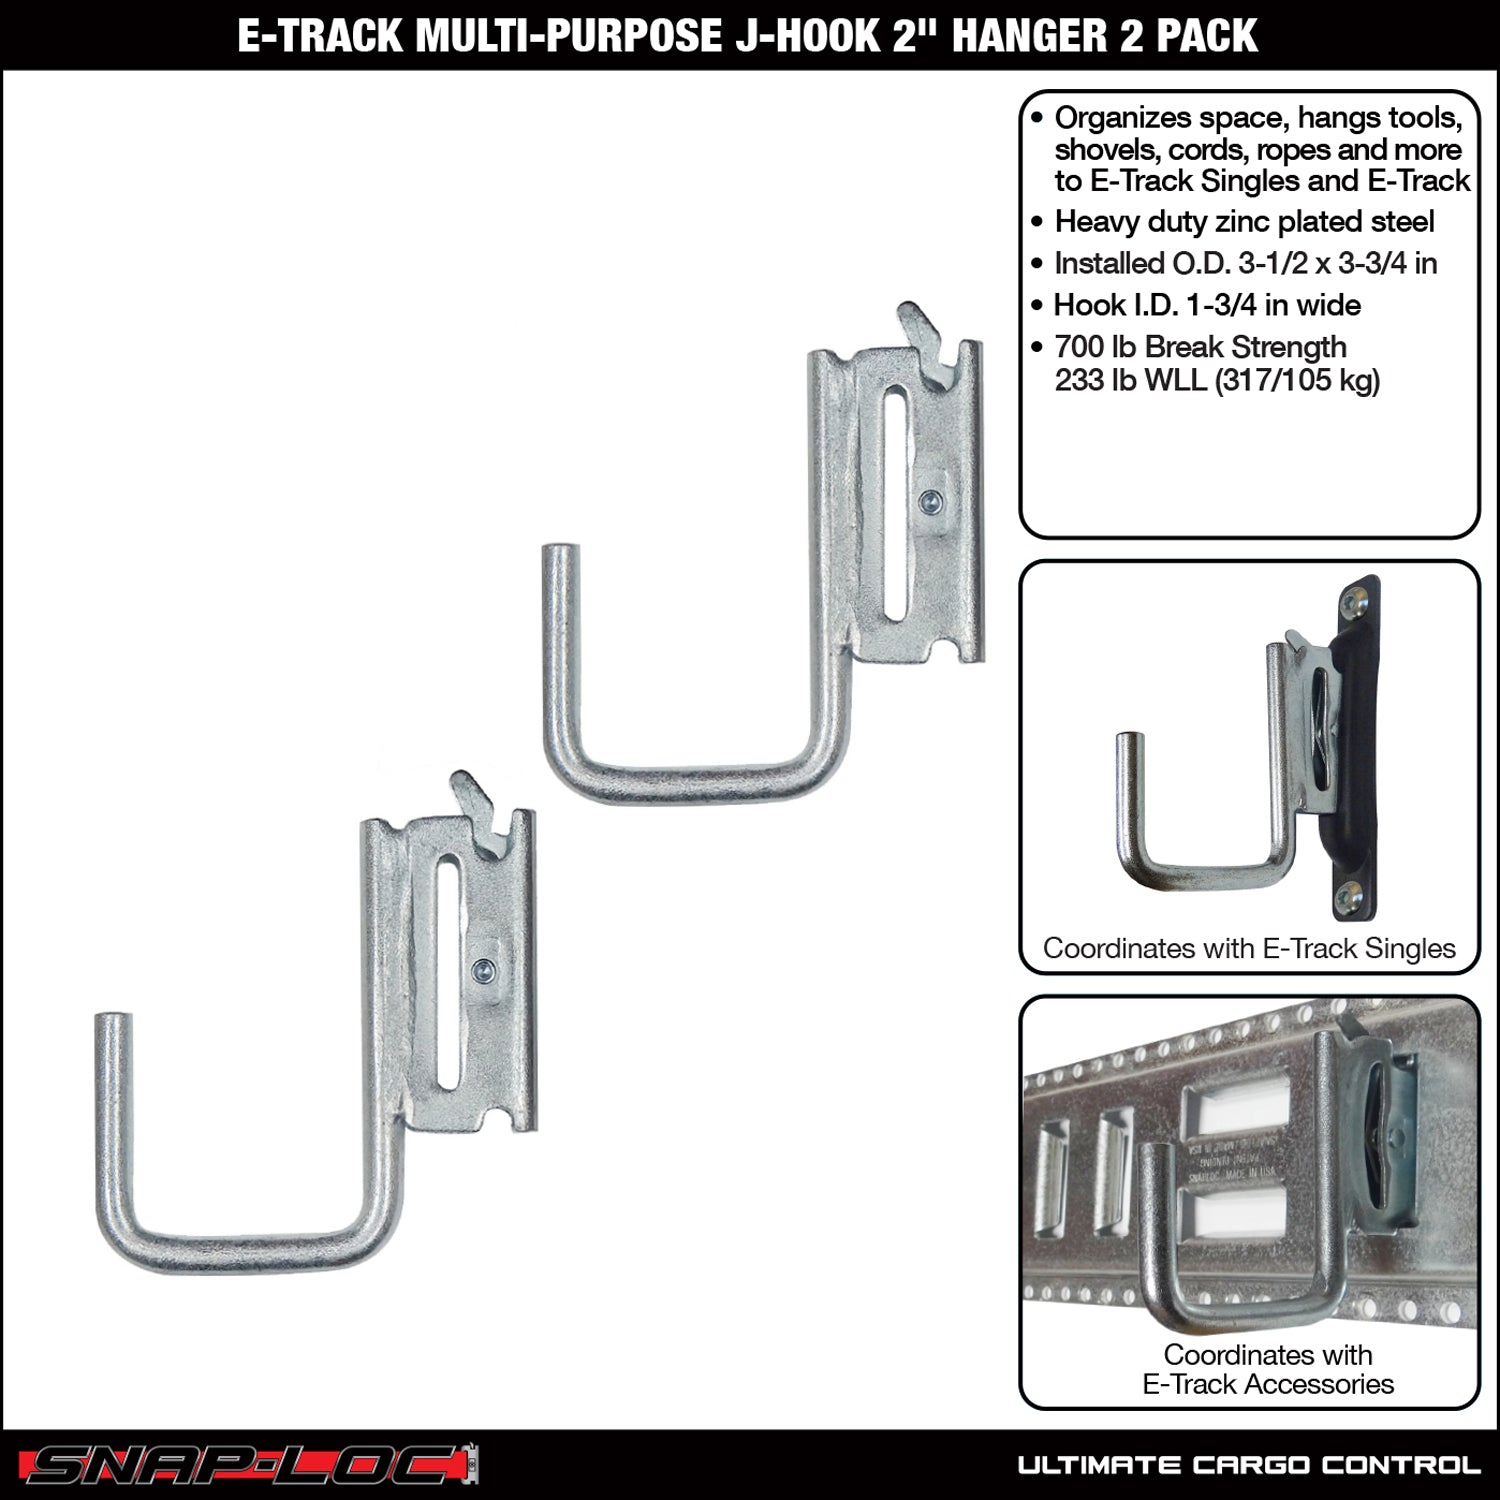 2 Rope Hooks For Cable 3/4IN